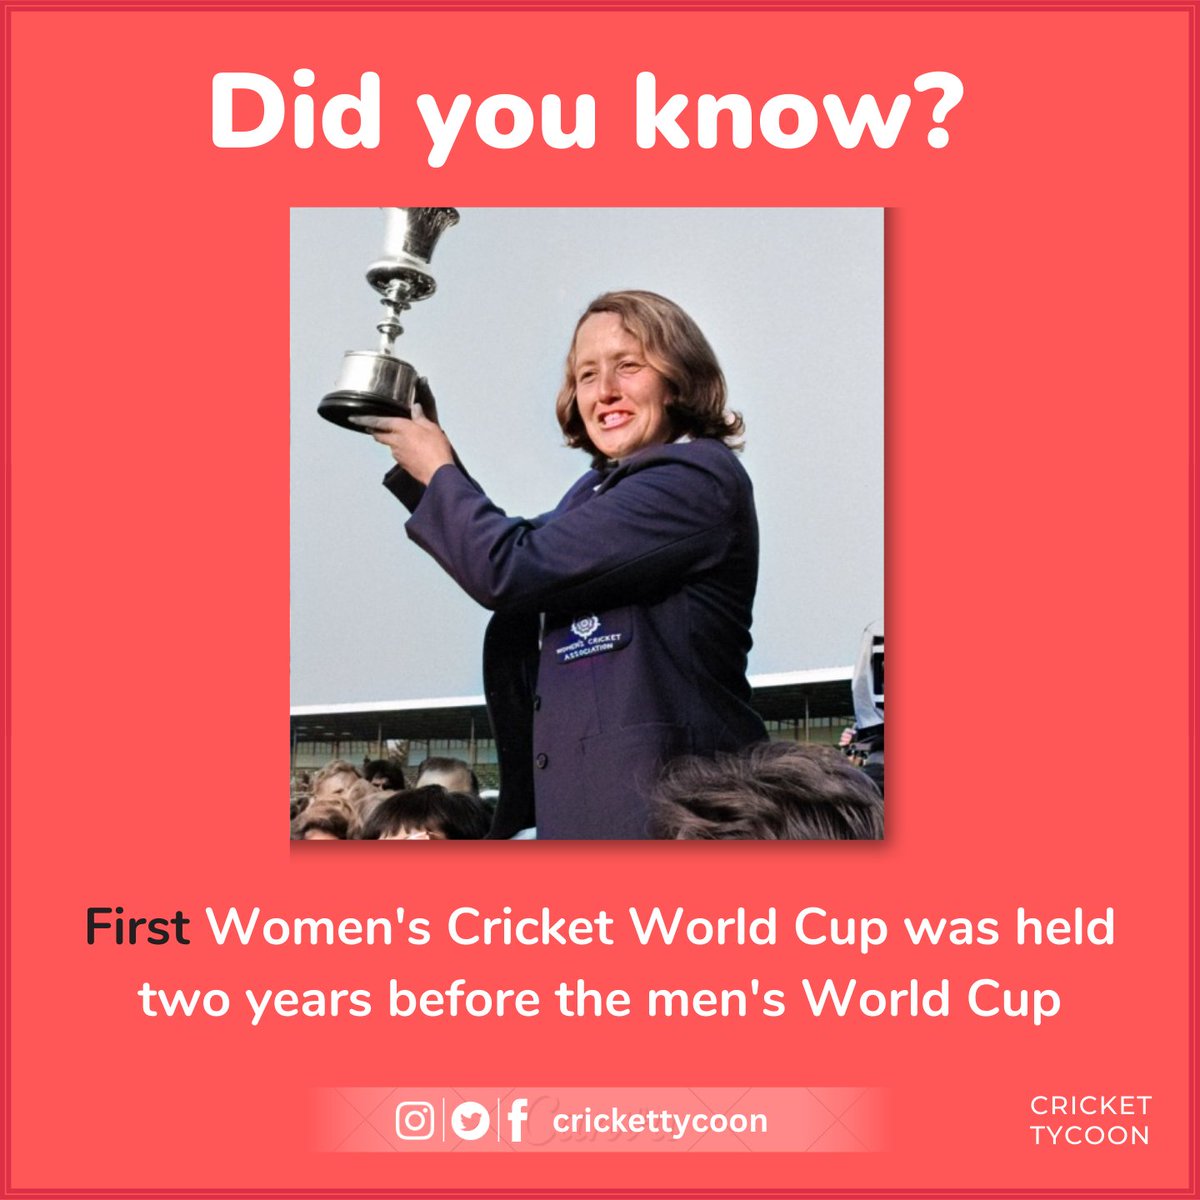 The inaugural women's cricket World Cup was held in 1973, two years before the first-ever men's World Cup. 

#cricket #testcricket #womenscricket #cricketfacts  #followforfollowback #follow4followback #crickettycoon #cricketfans